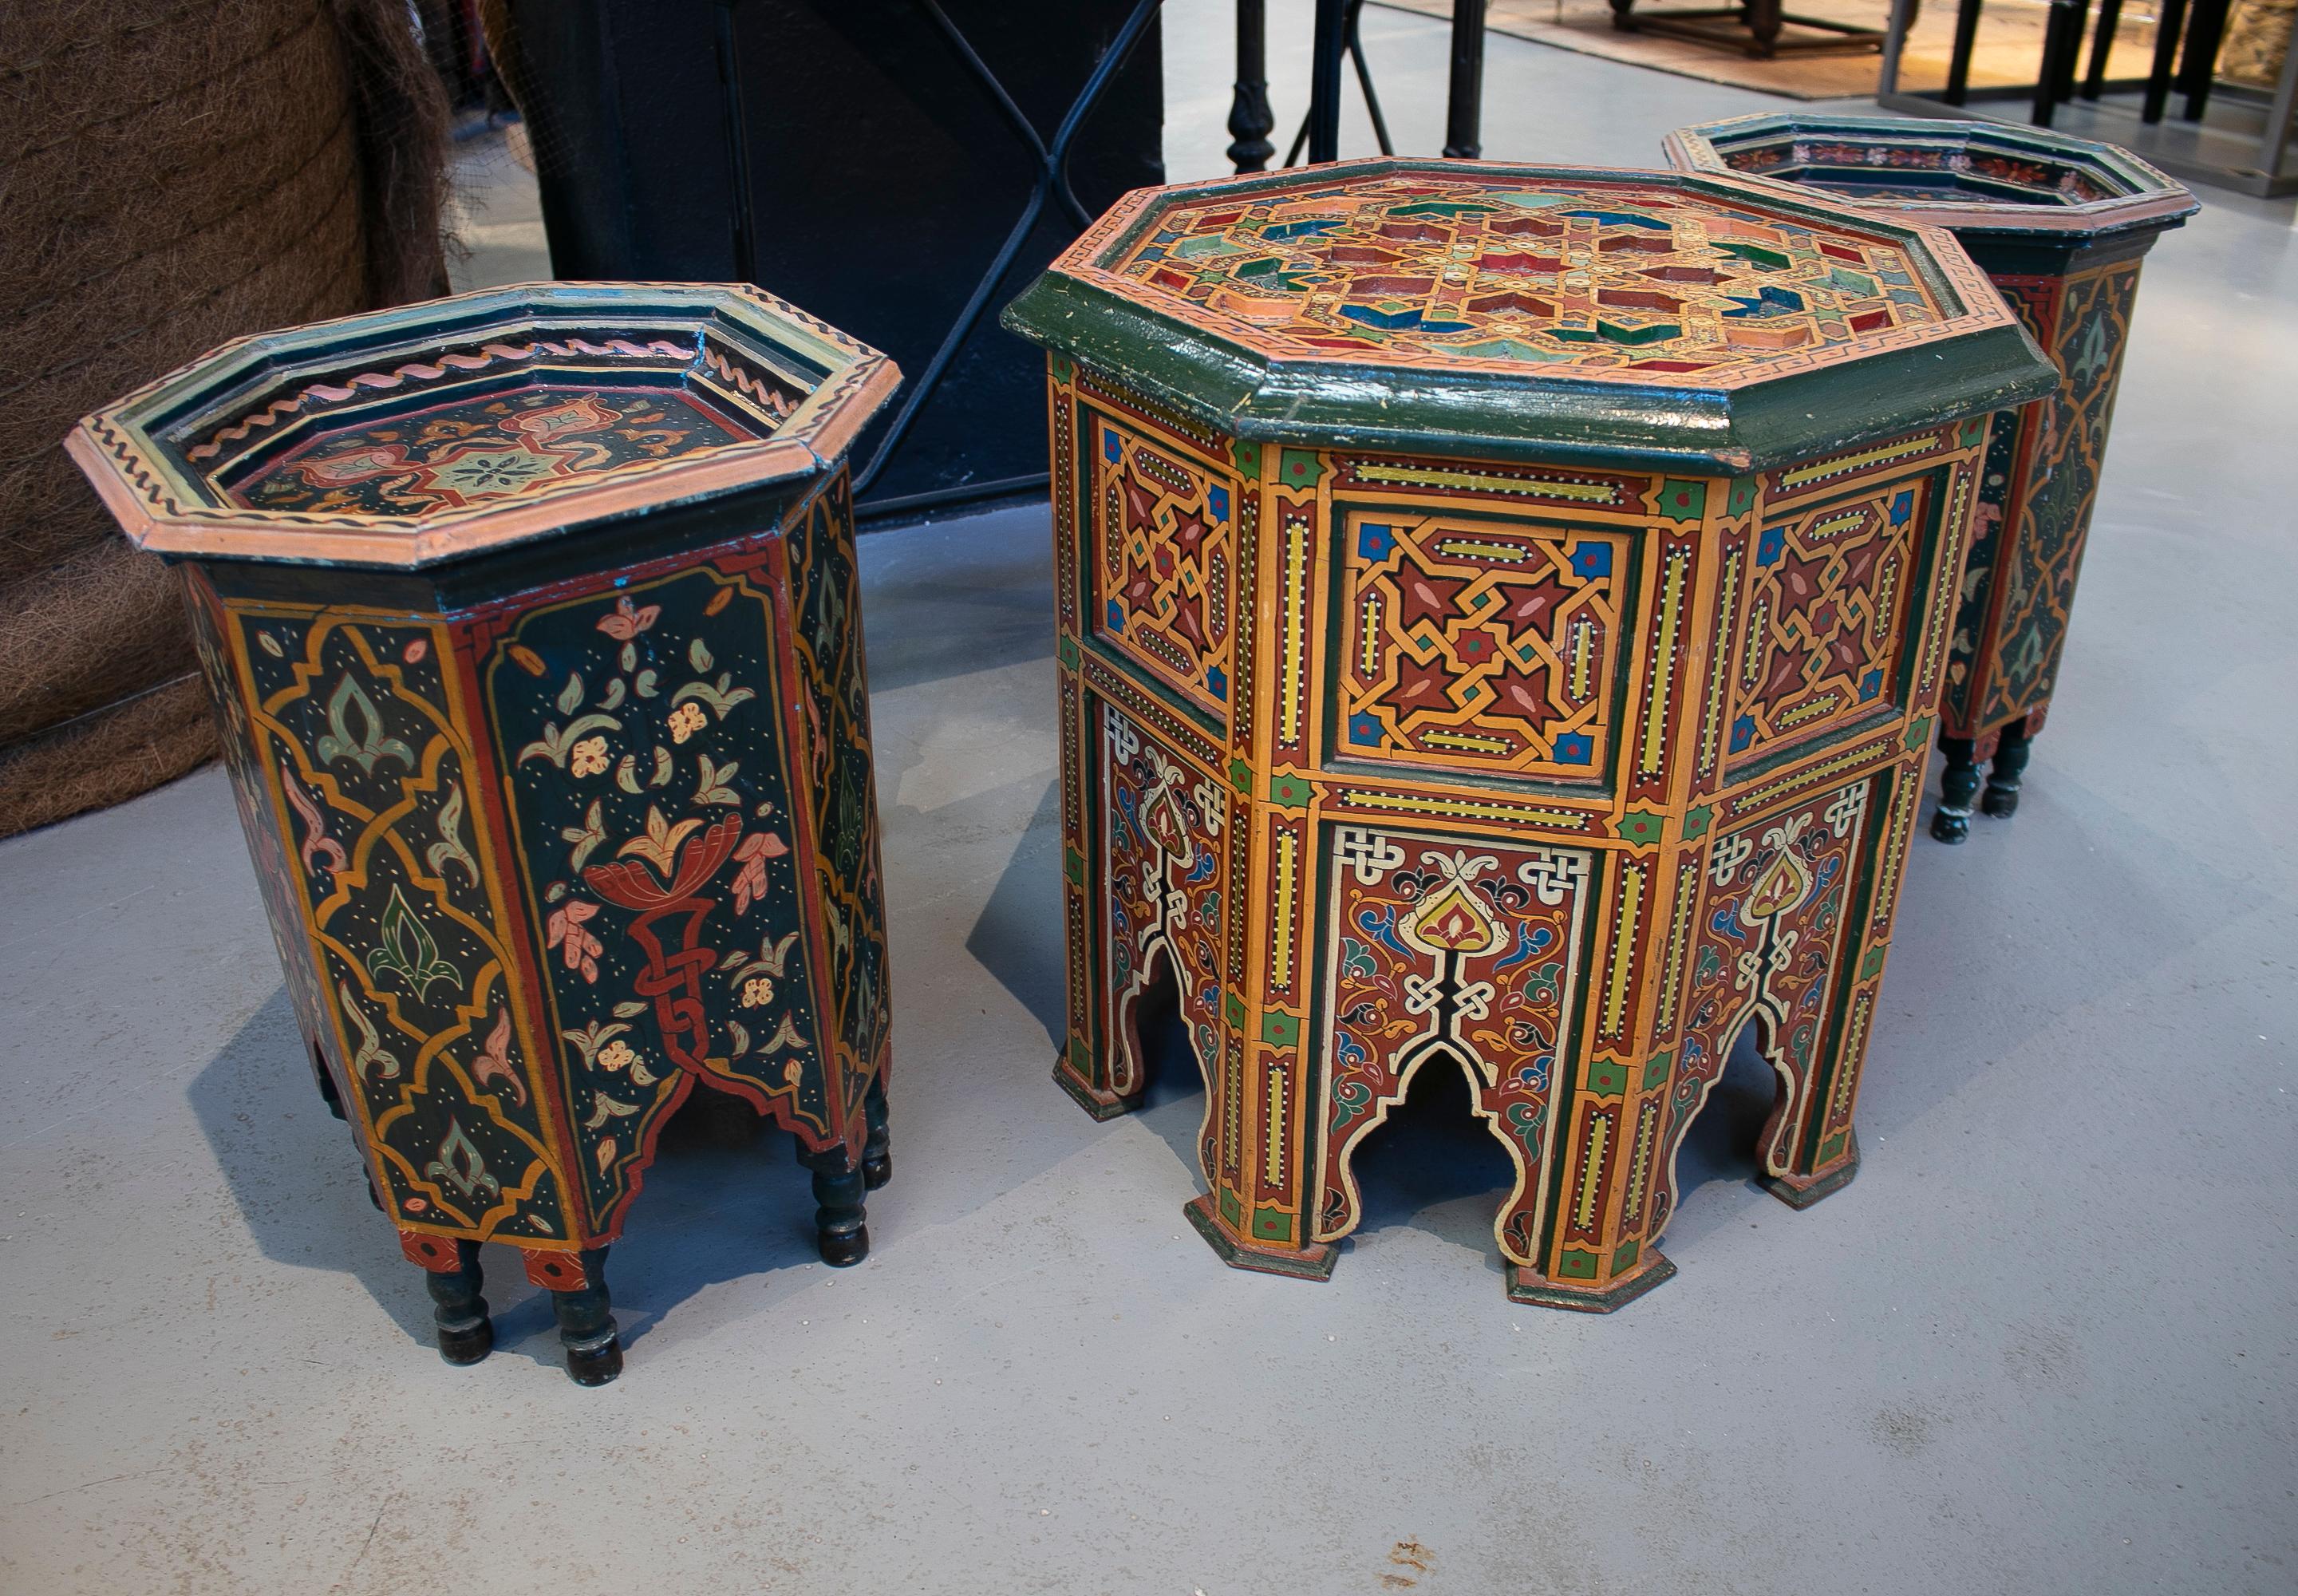 1960s set of three Moroccan octagonal wooden hand carved and painted side tables.

Small size dimensions: 48 x 35 x 35cm
Large size dimensions: 50 x 50 x 50cm.